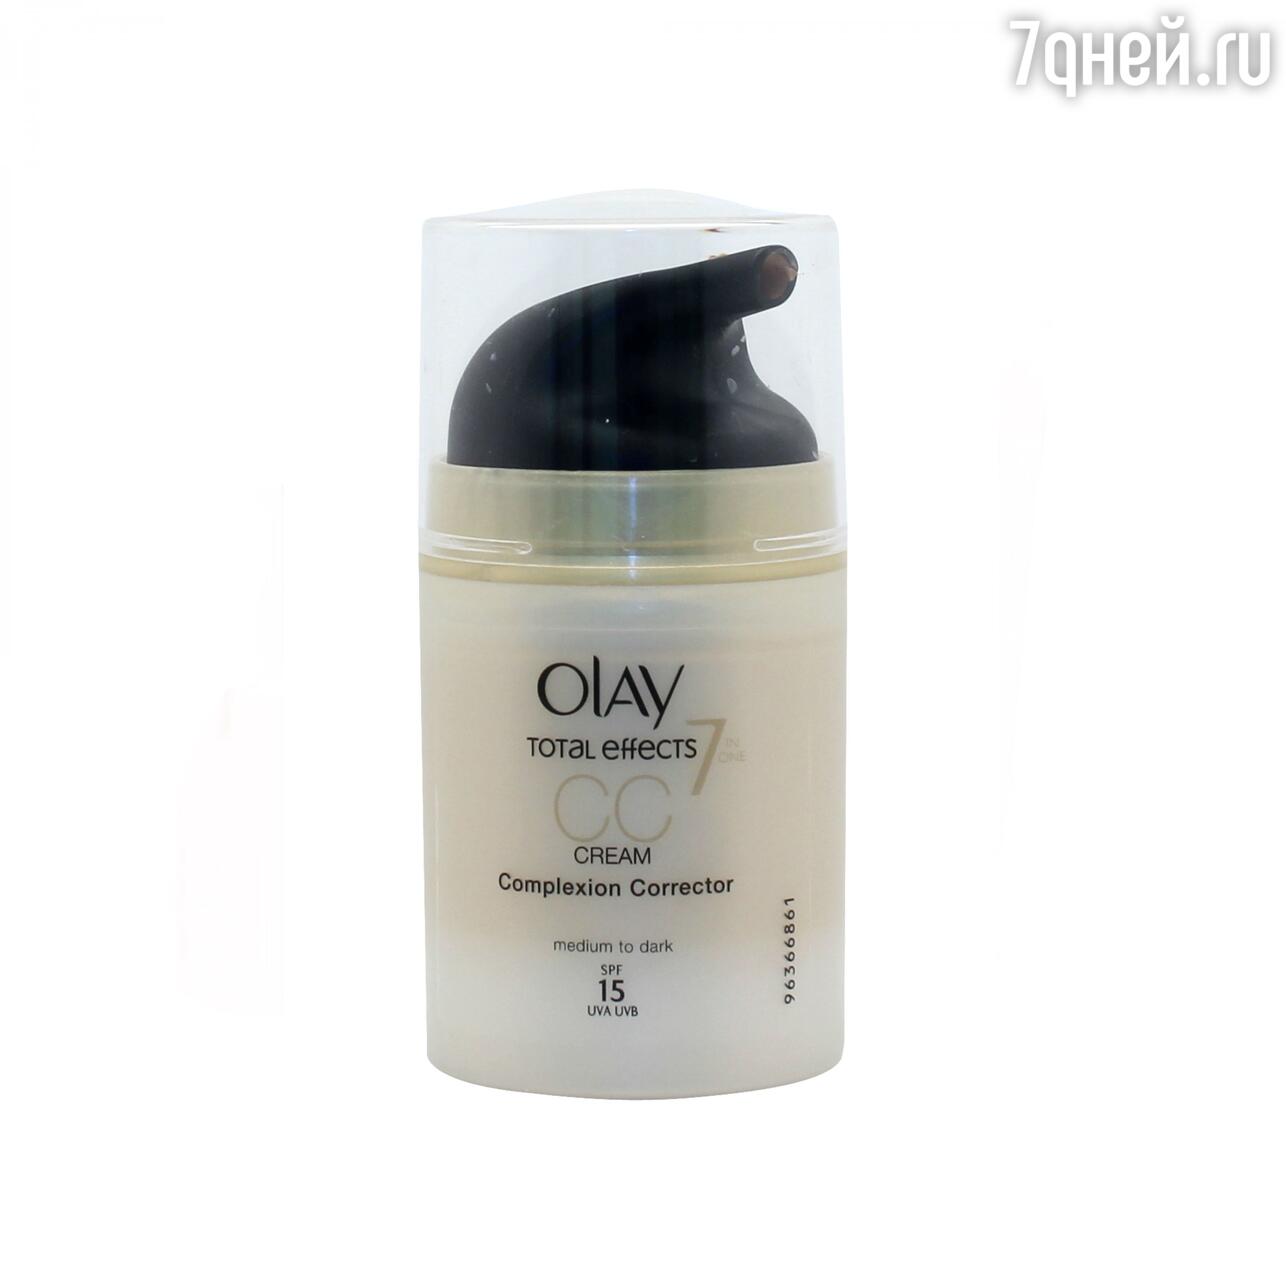   Total Effects CC Cream, Olay